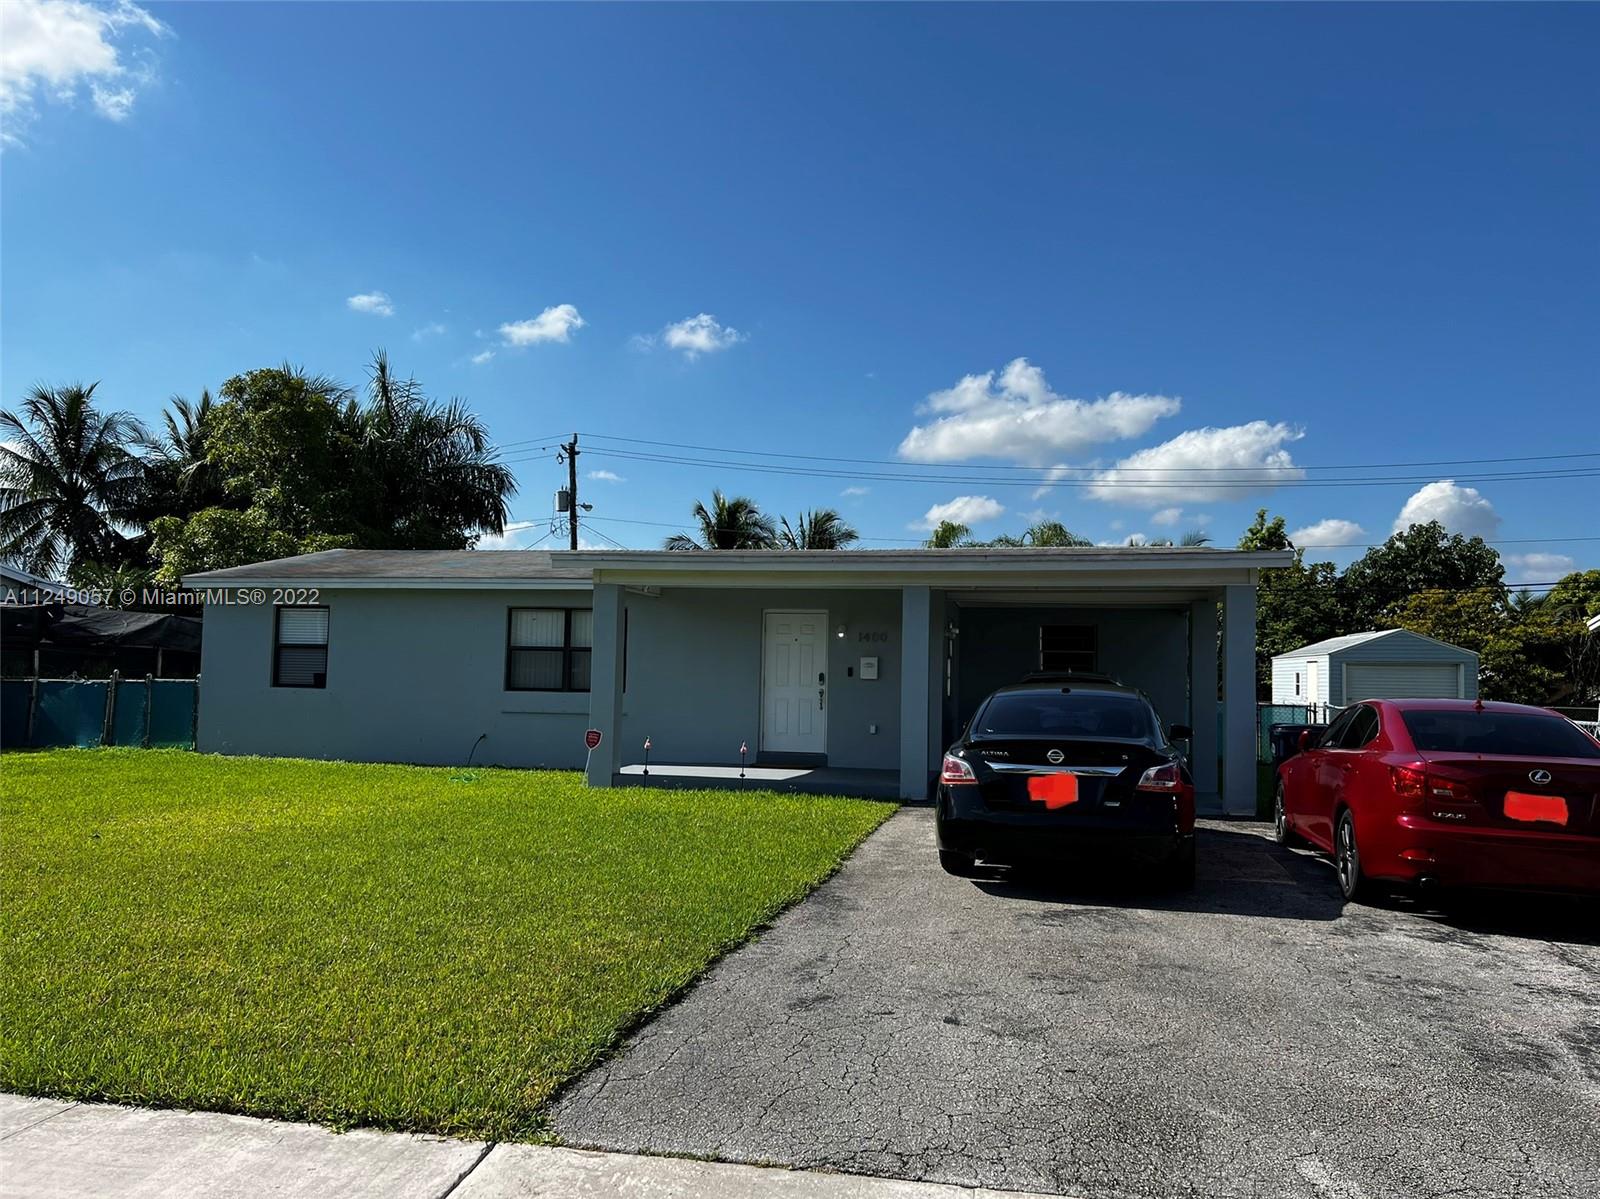 Great 2/1+ Car Port and HUGE backyard over 10,000 sq. ft. NO HOA! located 30 minutes from the Keys!. 
Comfortable size 2/1 property with much potential to expand to a 3/2. Good size laundry room, Tile flooring, good roof and good A/C. Spacious yard with convenient side yard ideal to park a boat, truck, RV, build a pool, and much more. Centrally located down the street to many shopping options such as Publix, Lowes, Walmart and much more. Send highest and best offer along with approval letter.